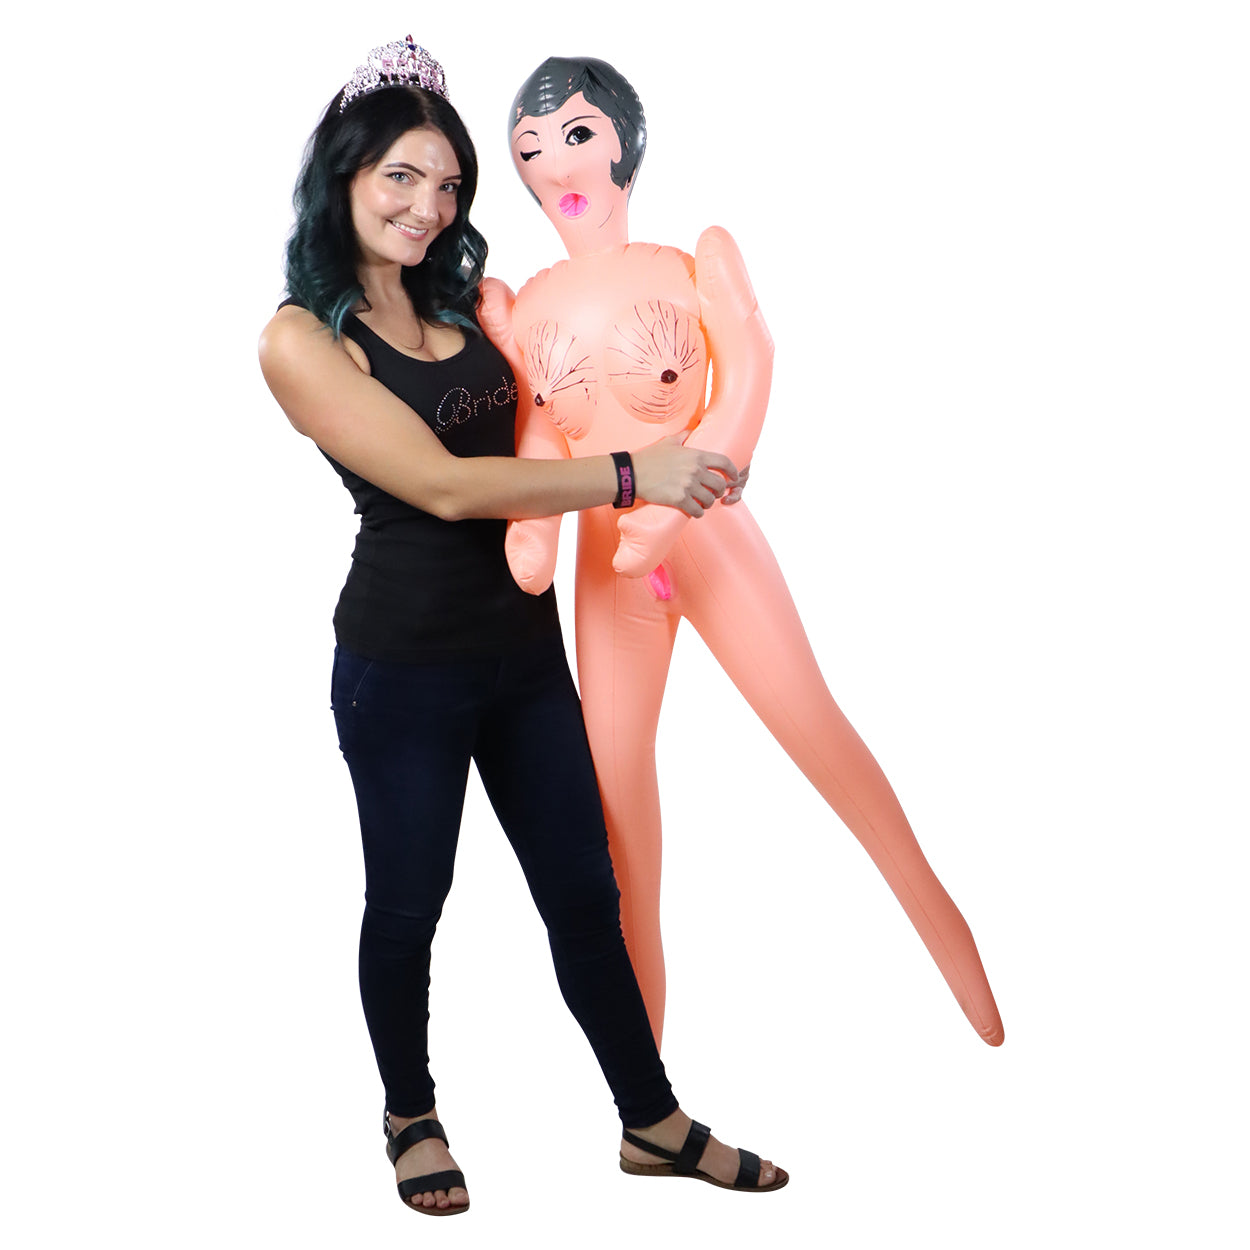 Image of GILF Blowup Doll